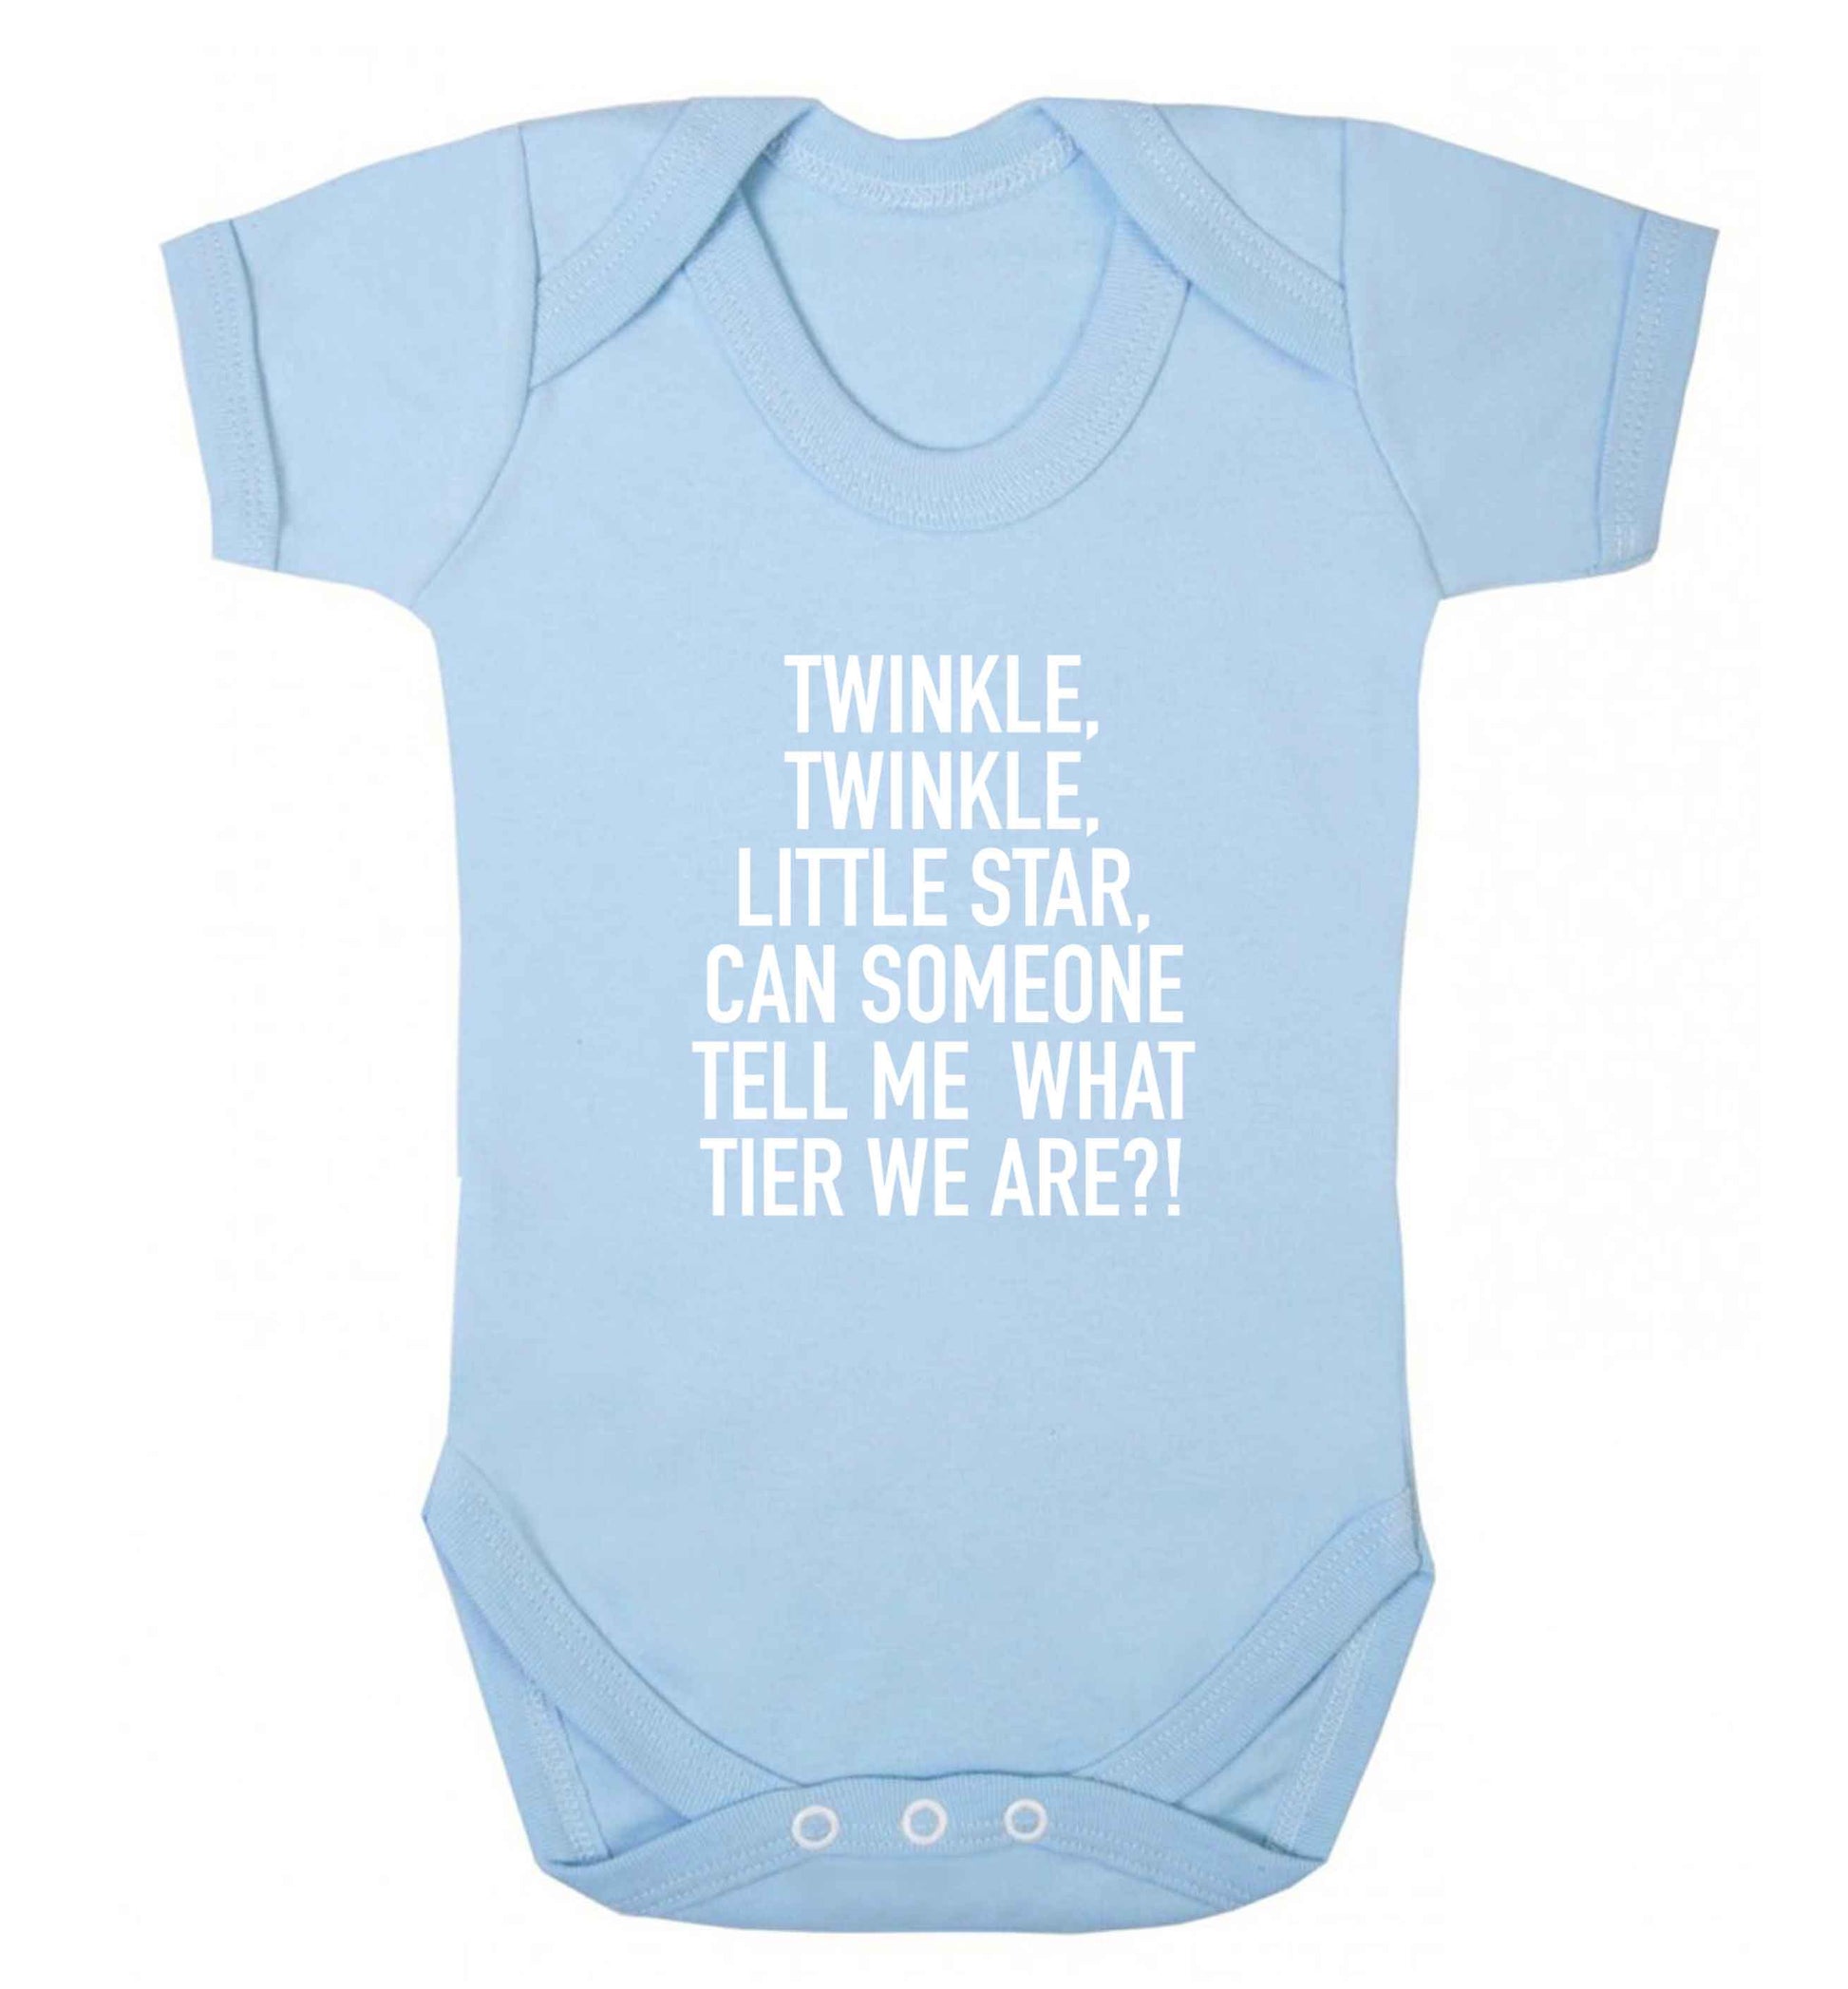 Twinkle twinkle, little star does anyone know what tier we are? baby vest pale blue 18-24 months